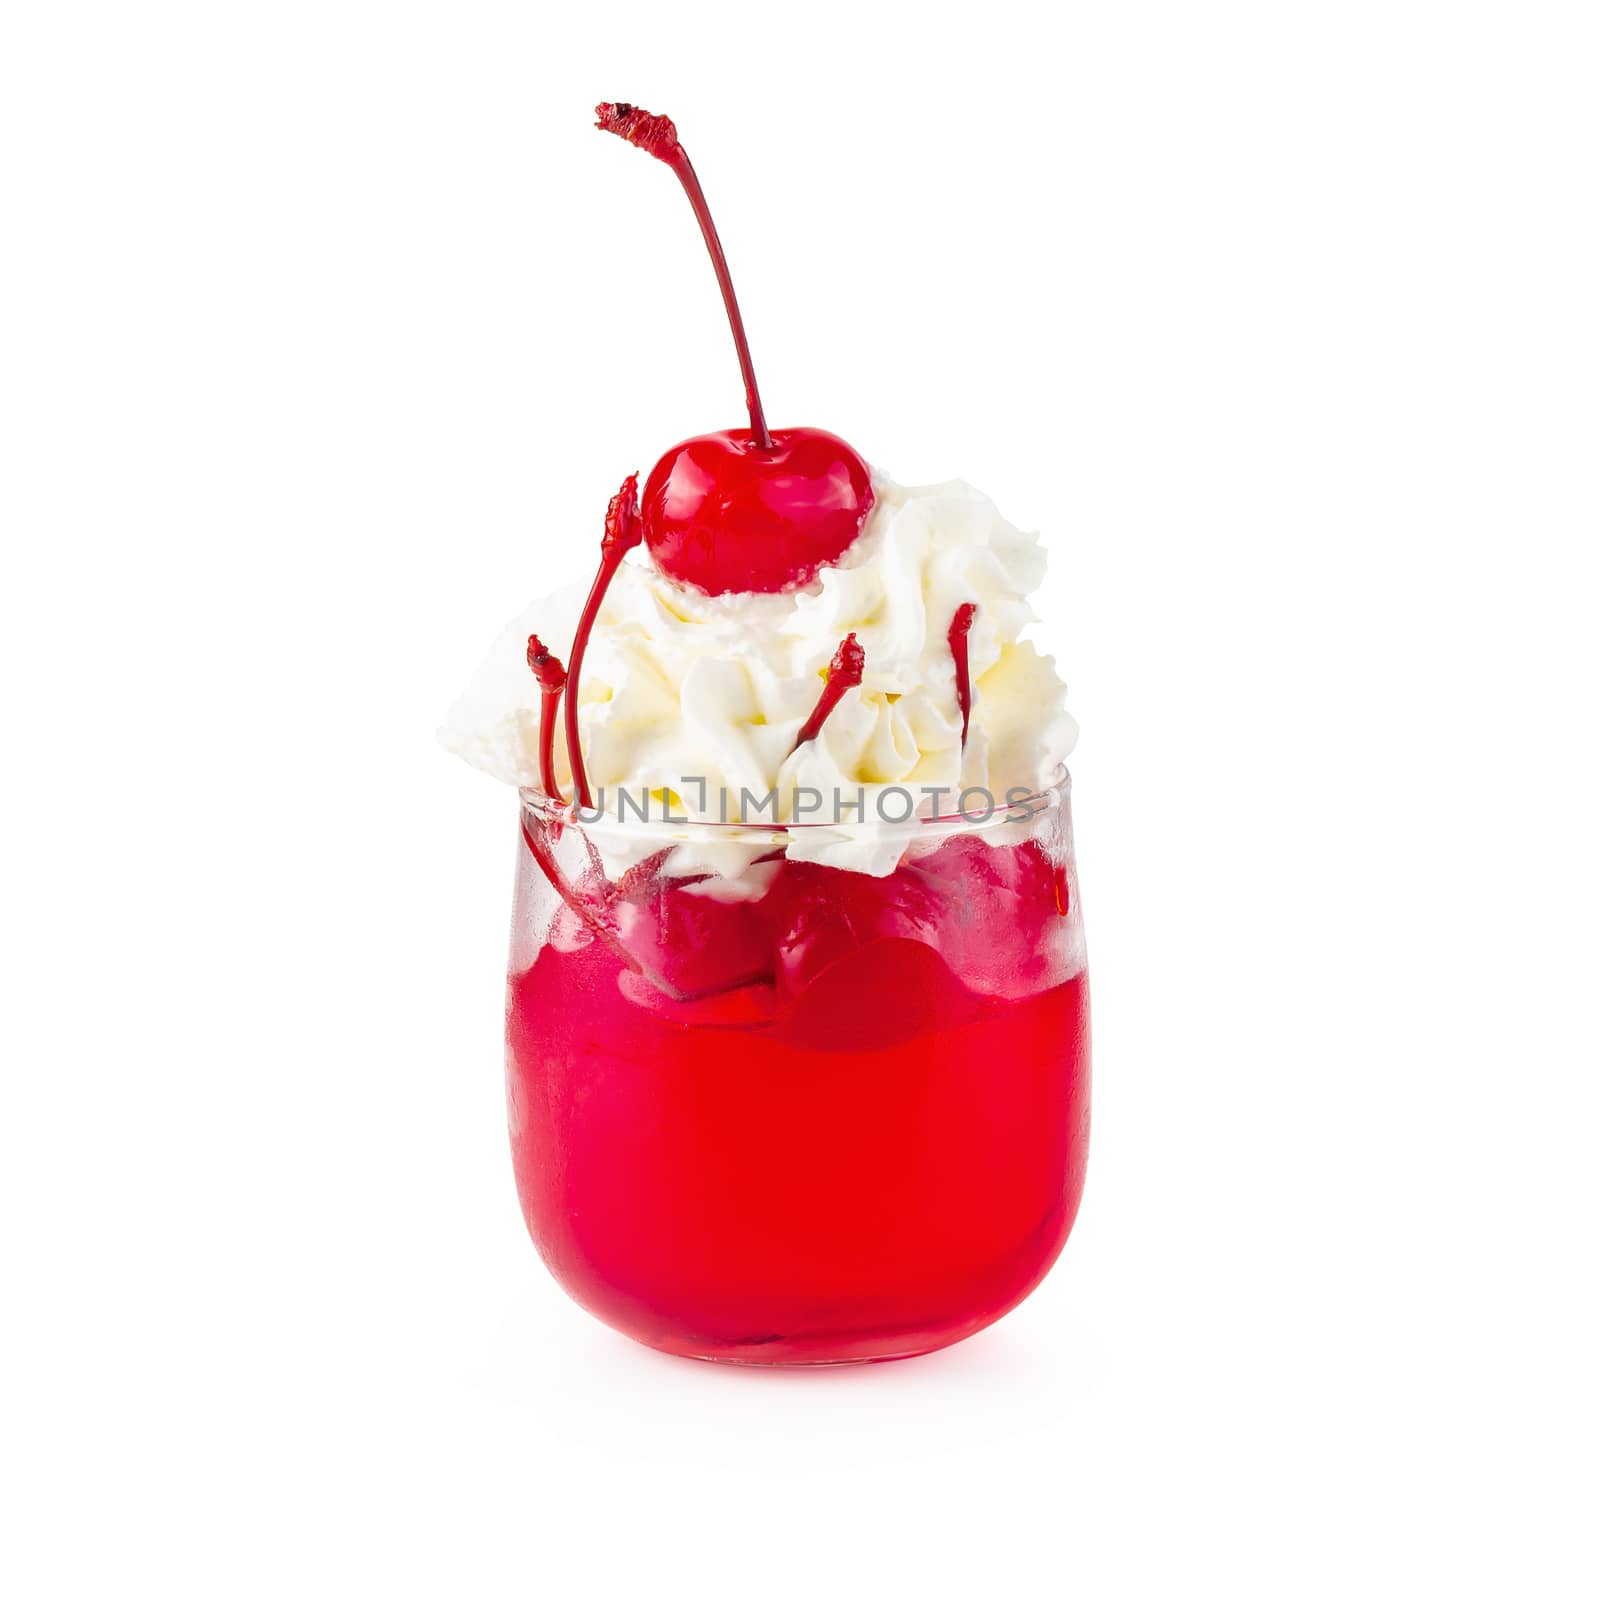 Strawberry jelly in a glass with cherries and whipped cream isol by kaiskynet